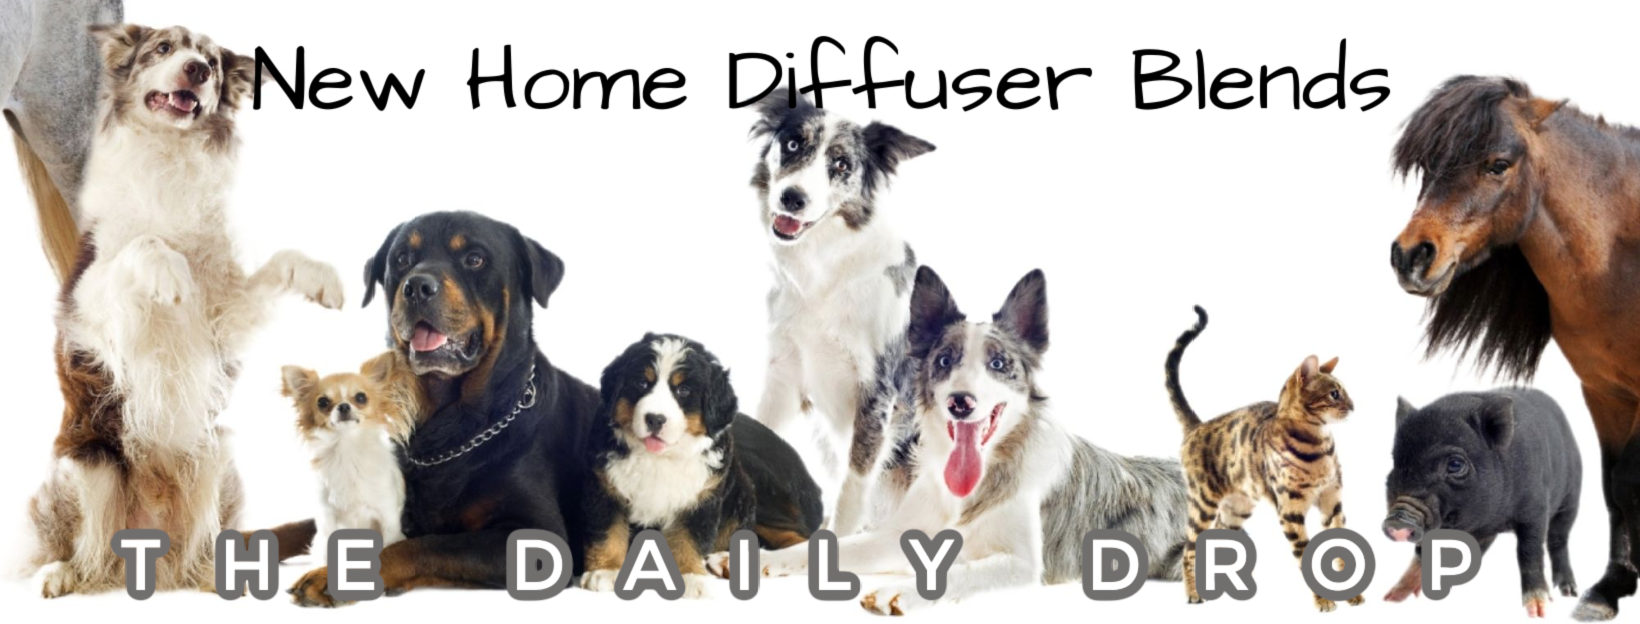 New Home Diffuser Blends | From Sandy